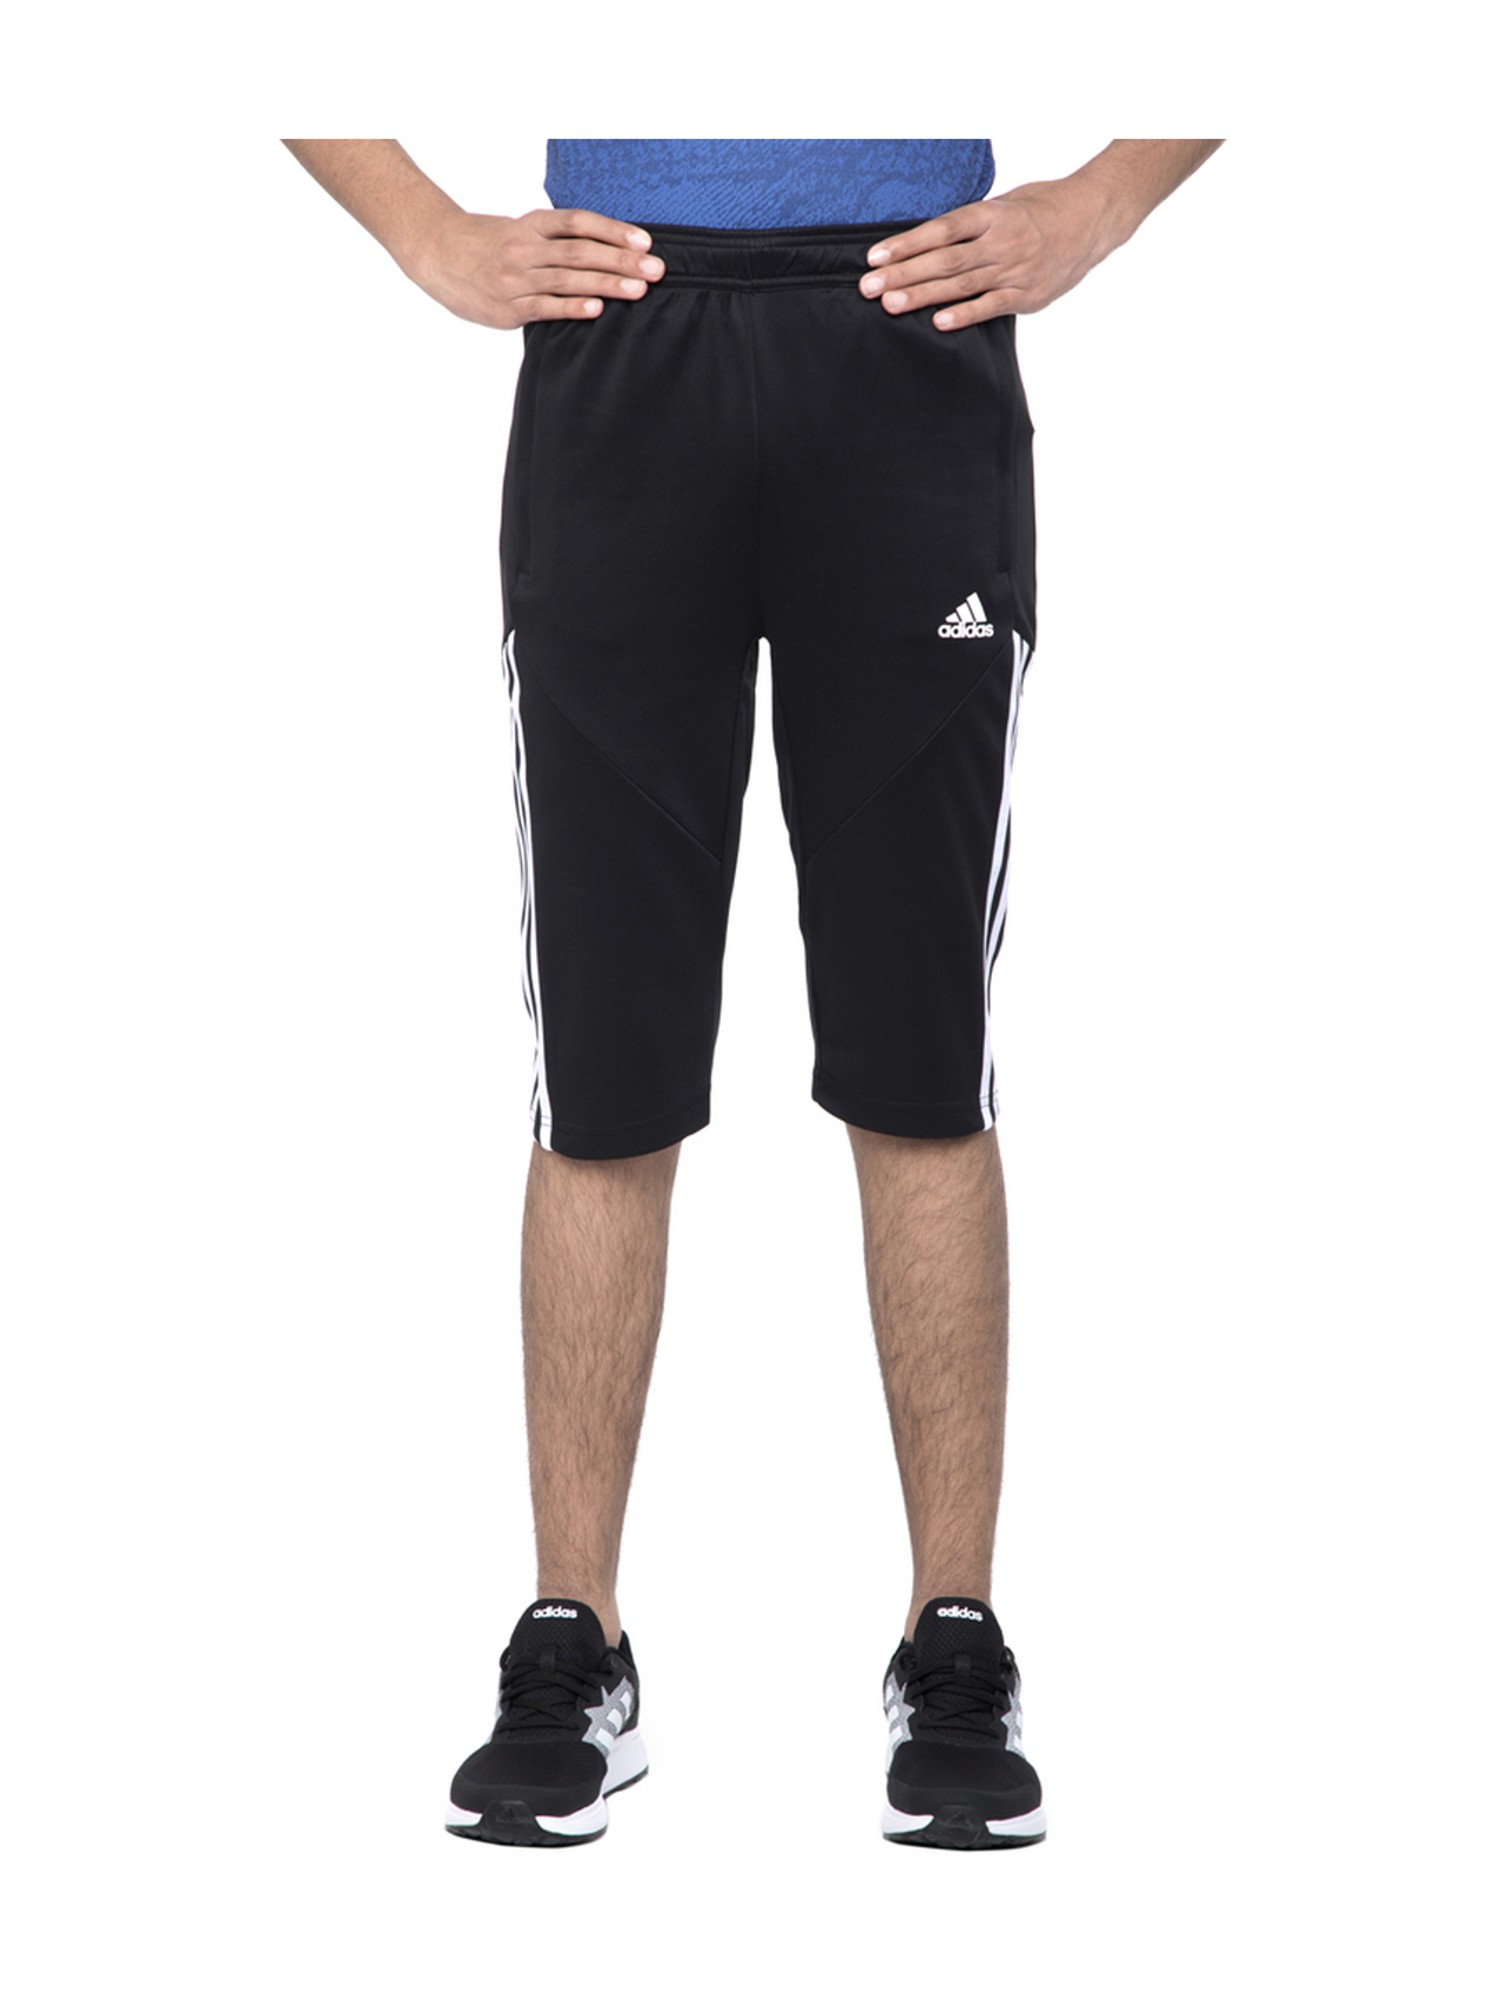 Buy Instadry Mens Three Fourth For Sports  Workout Activities